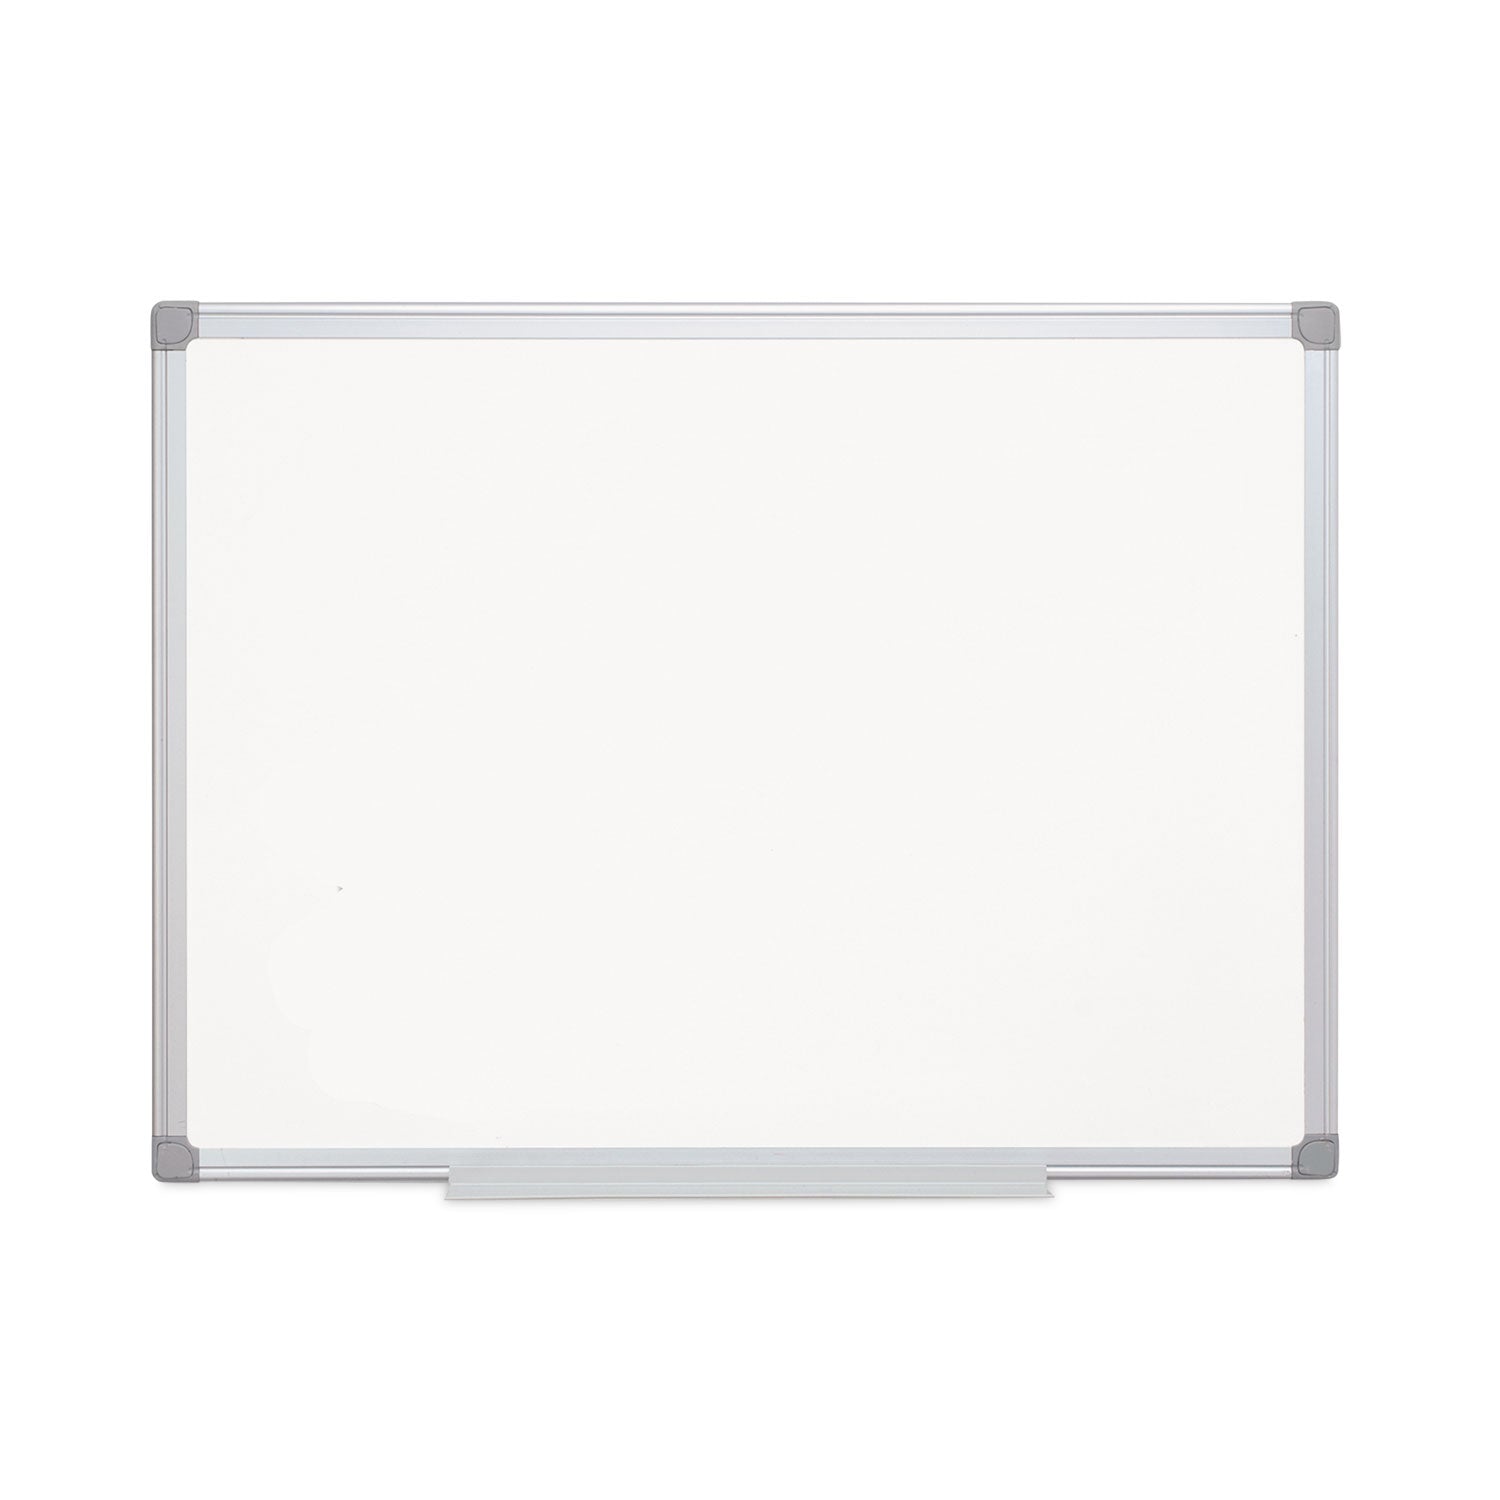 Earth Gold Ultra Magnetic Dry Erase Boards, 24 x 36, White Surface, Silver Aluminum Frame - 